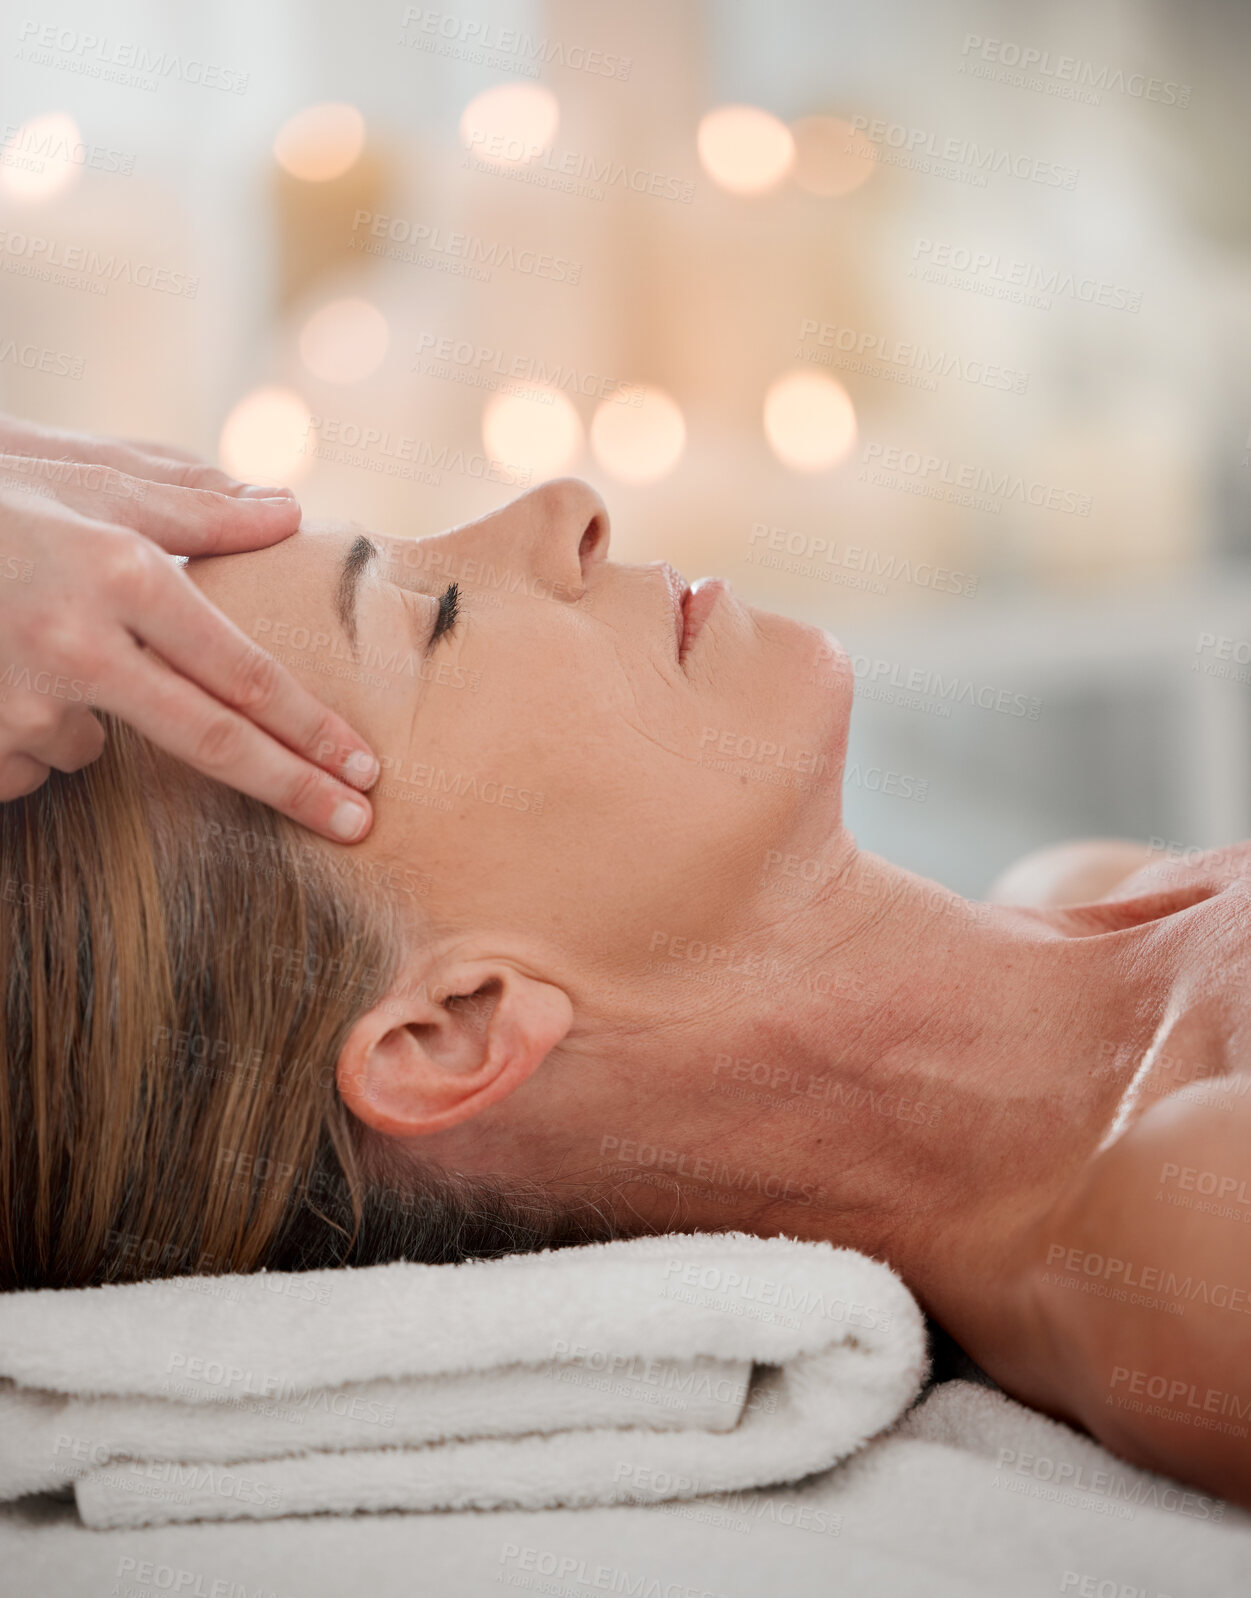 Buy stock photo Resort, head massage and hands of person for relax, luxury treatment or stress relief on bed. Zen, temple and masseuse with mature client for wellness therapy, natural healing or peaceful at spa